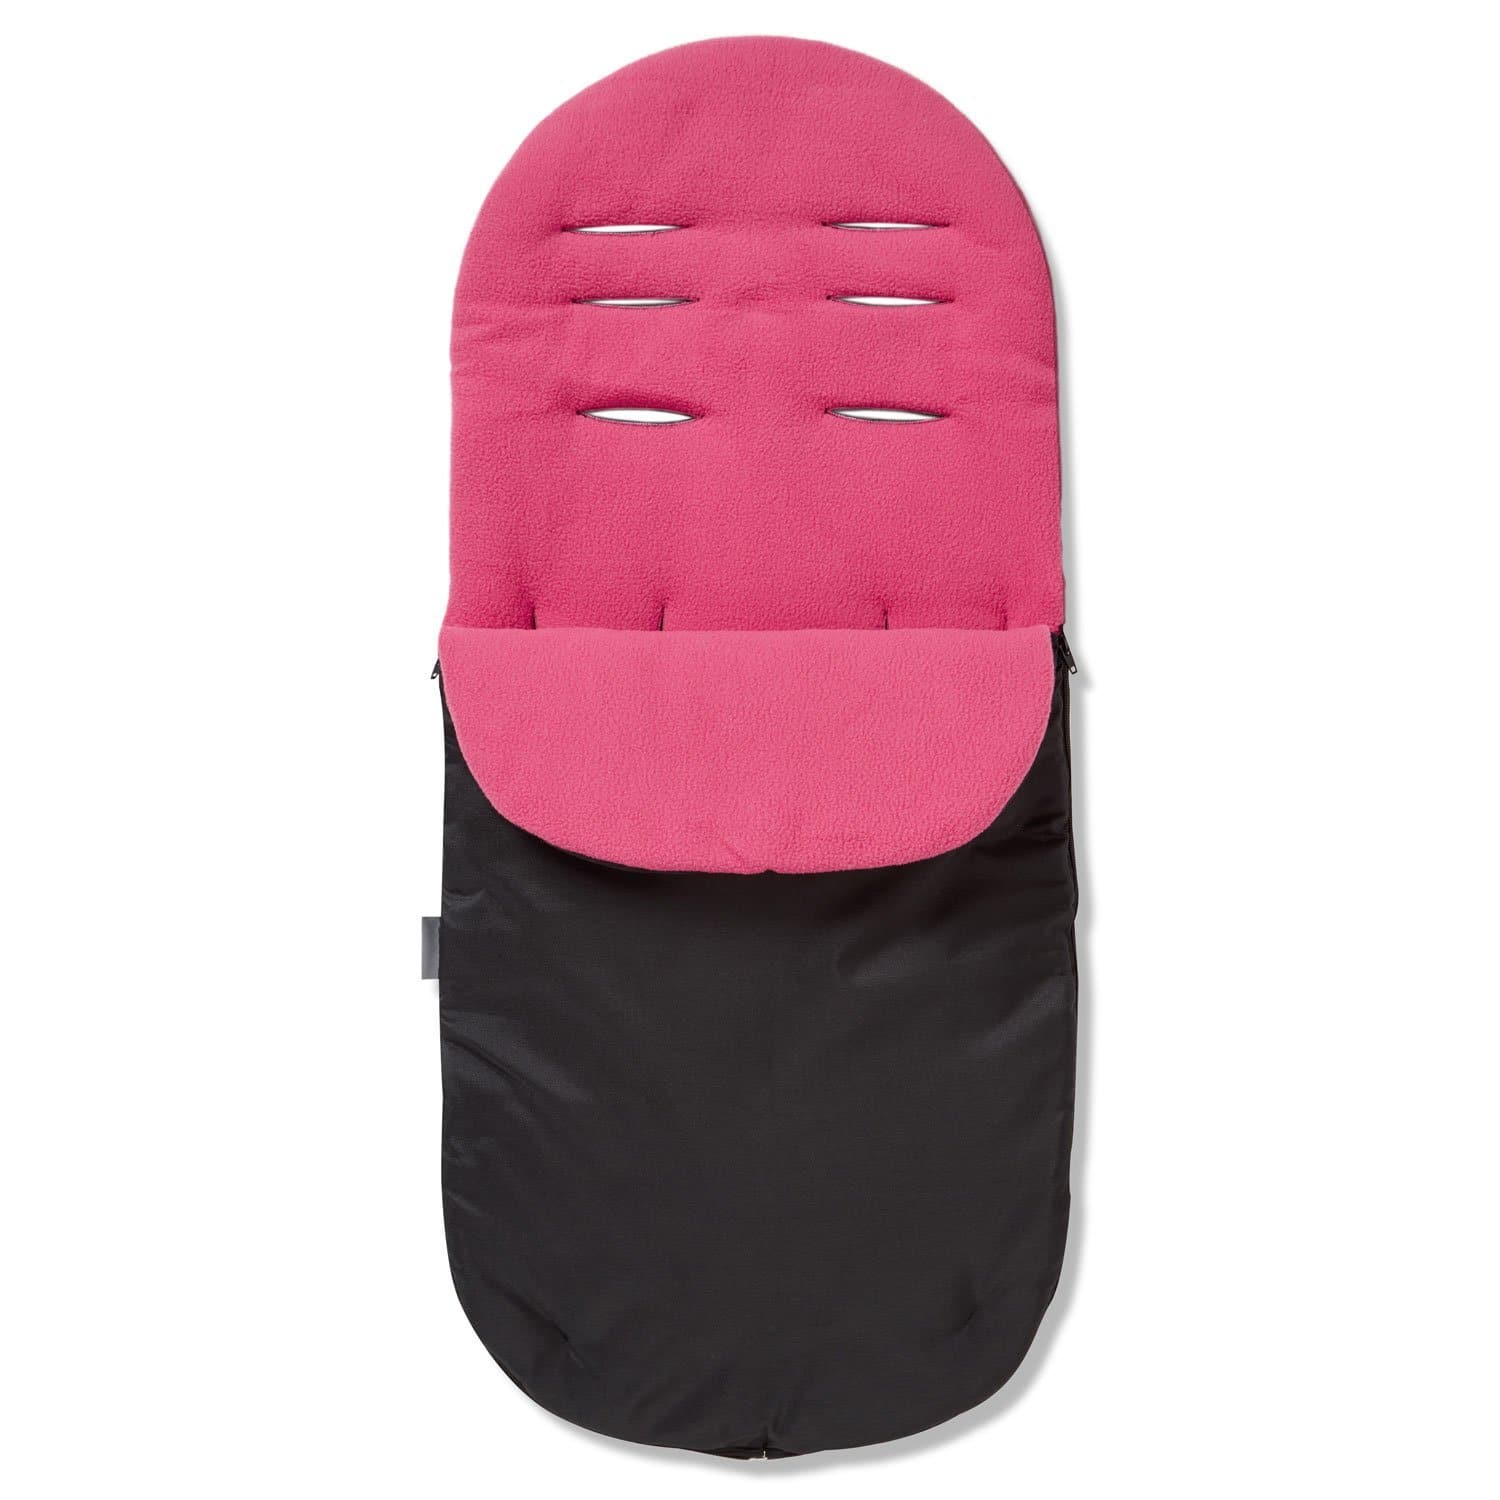 Footmuff / Cosy Toes Compatible with Bebecar - For Your Little One